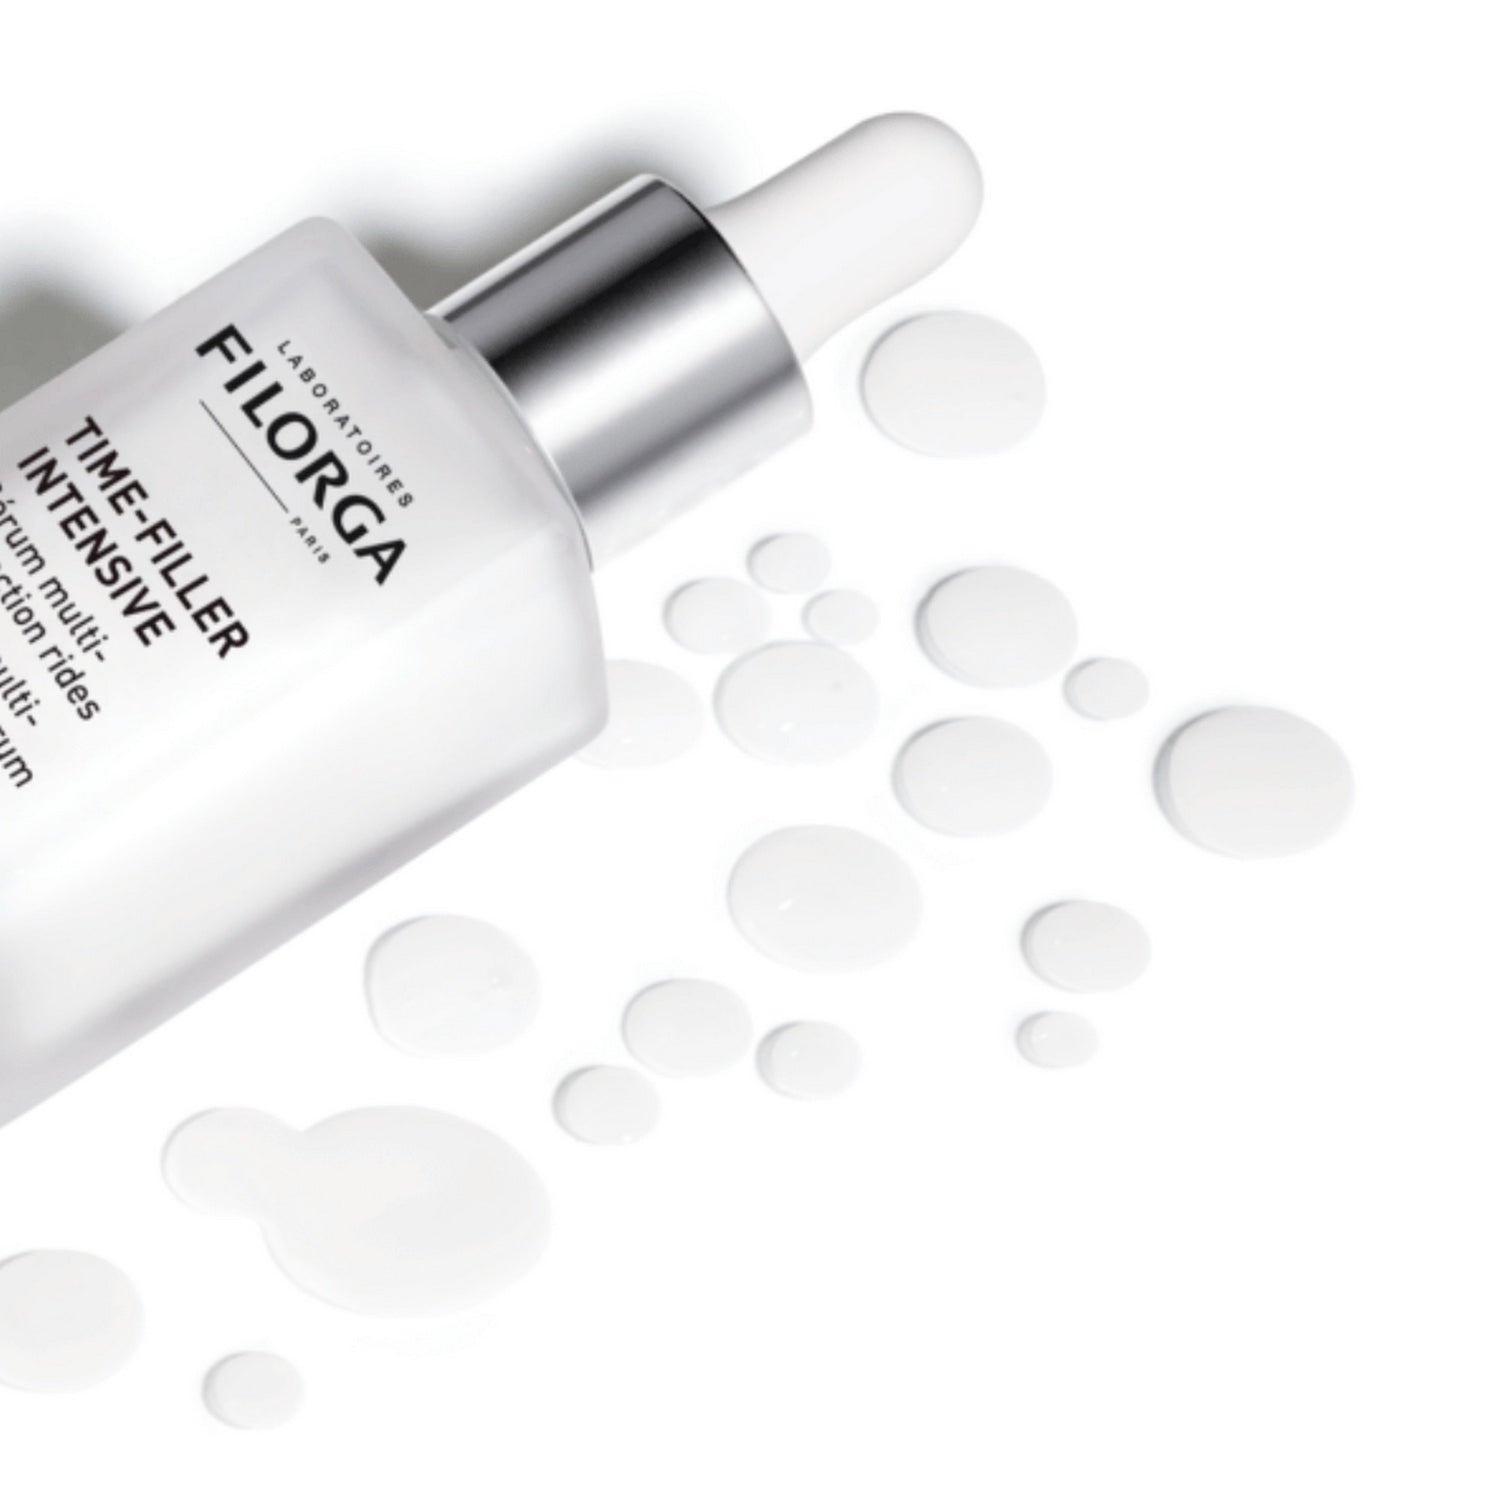 FILORGA TIME FILLER INTENSIVE SERUM with droplets all around it